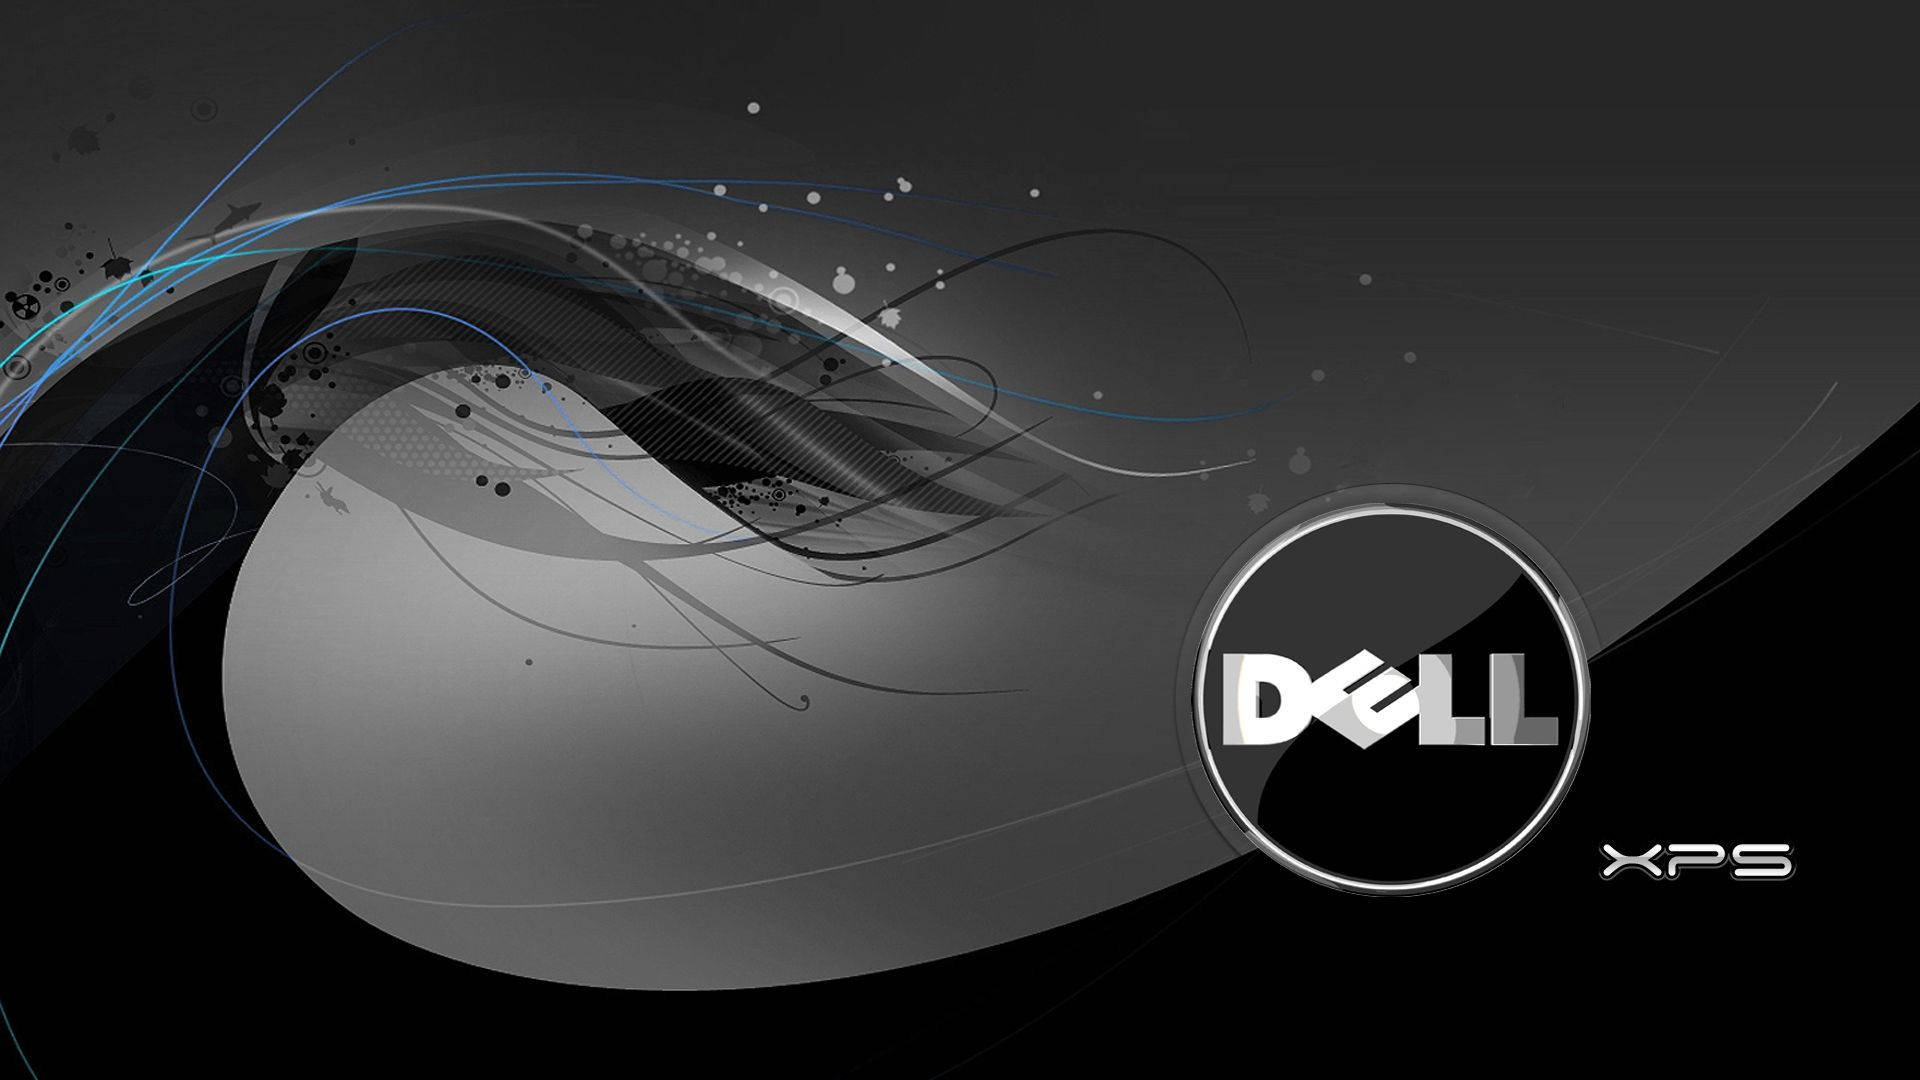 Classic Dell Xps Abstract Background